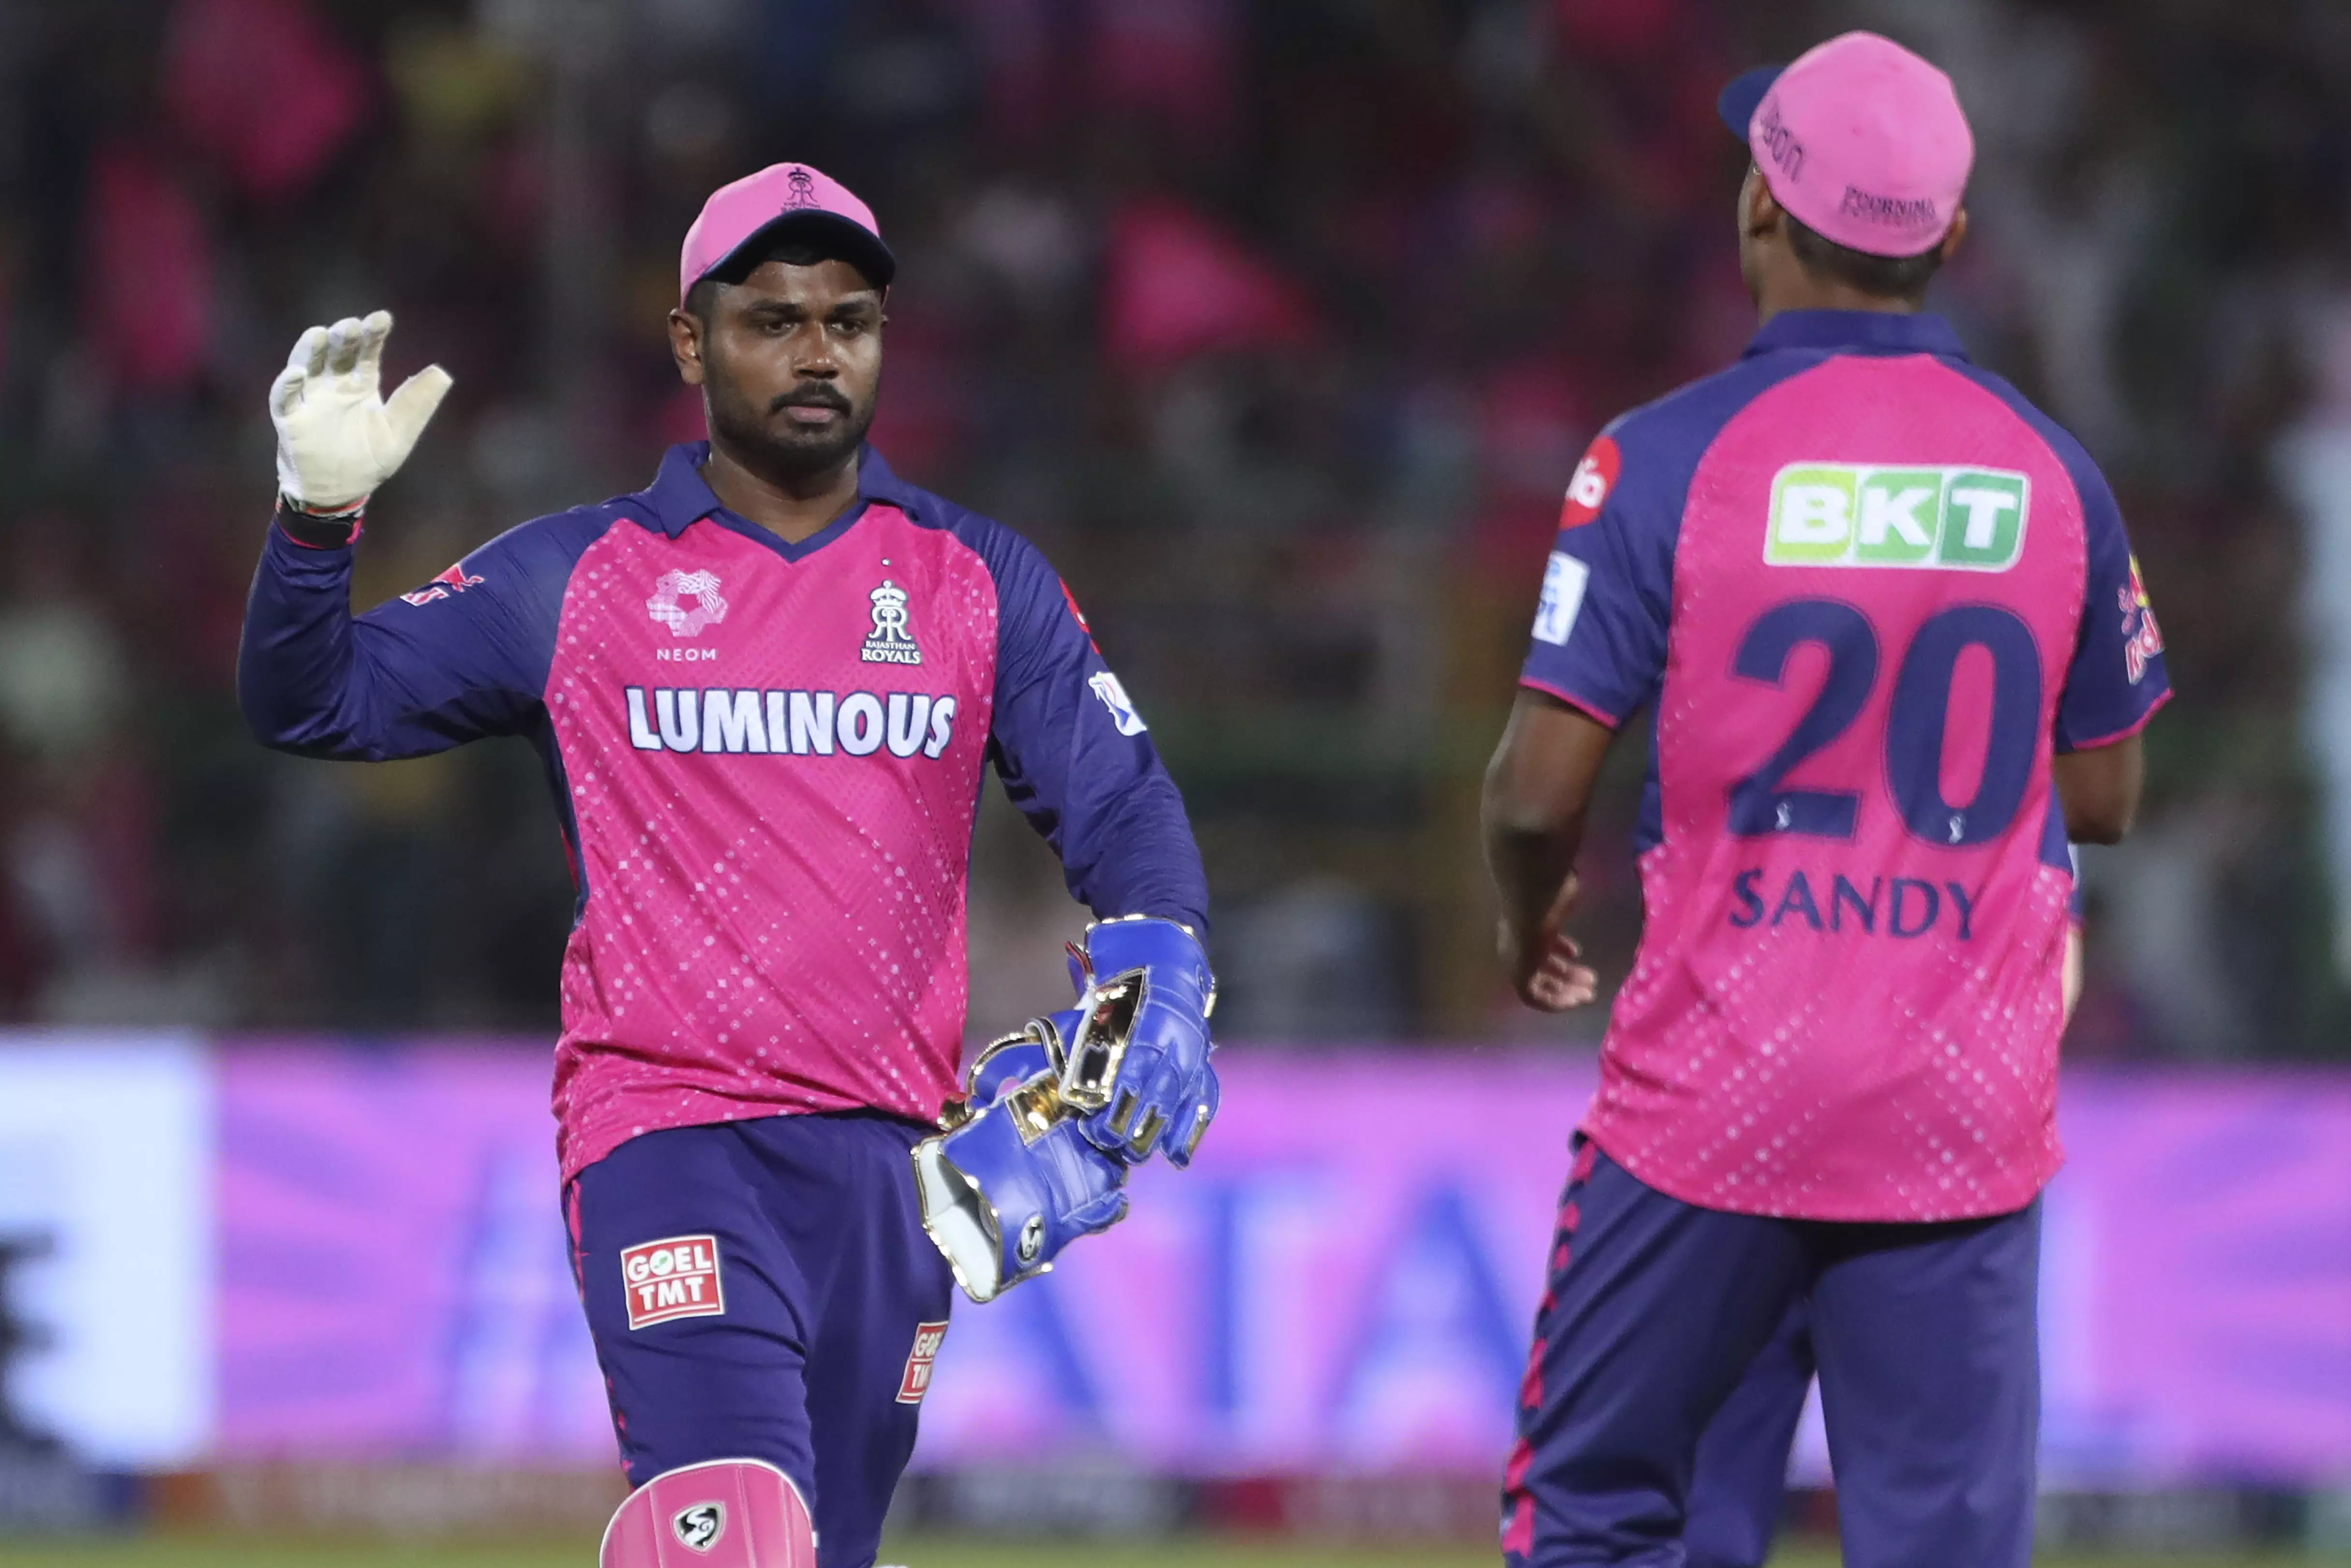 Samson leads Rajasthan to win over Lucknow in IPL